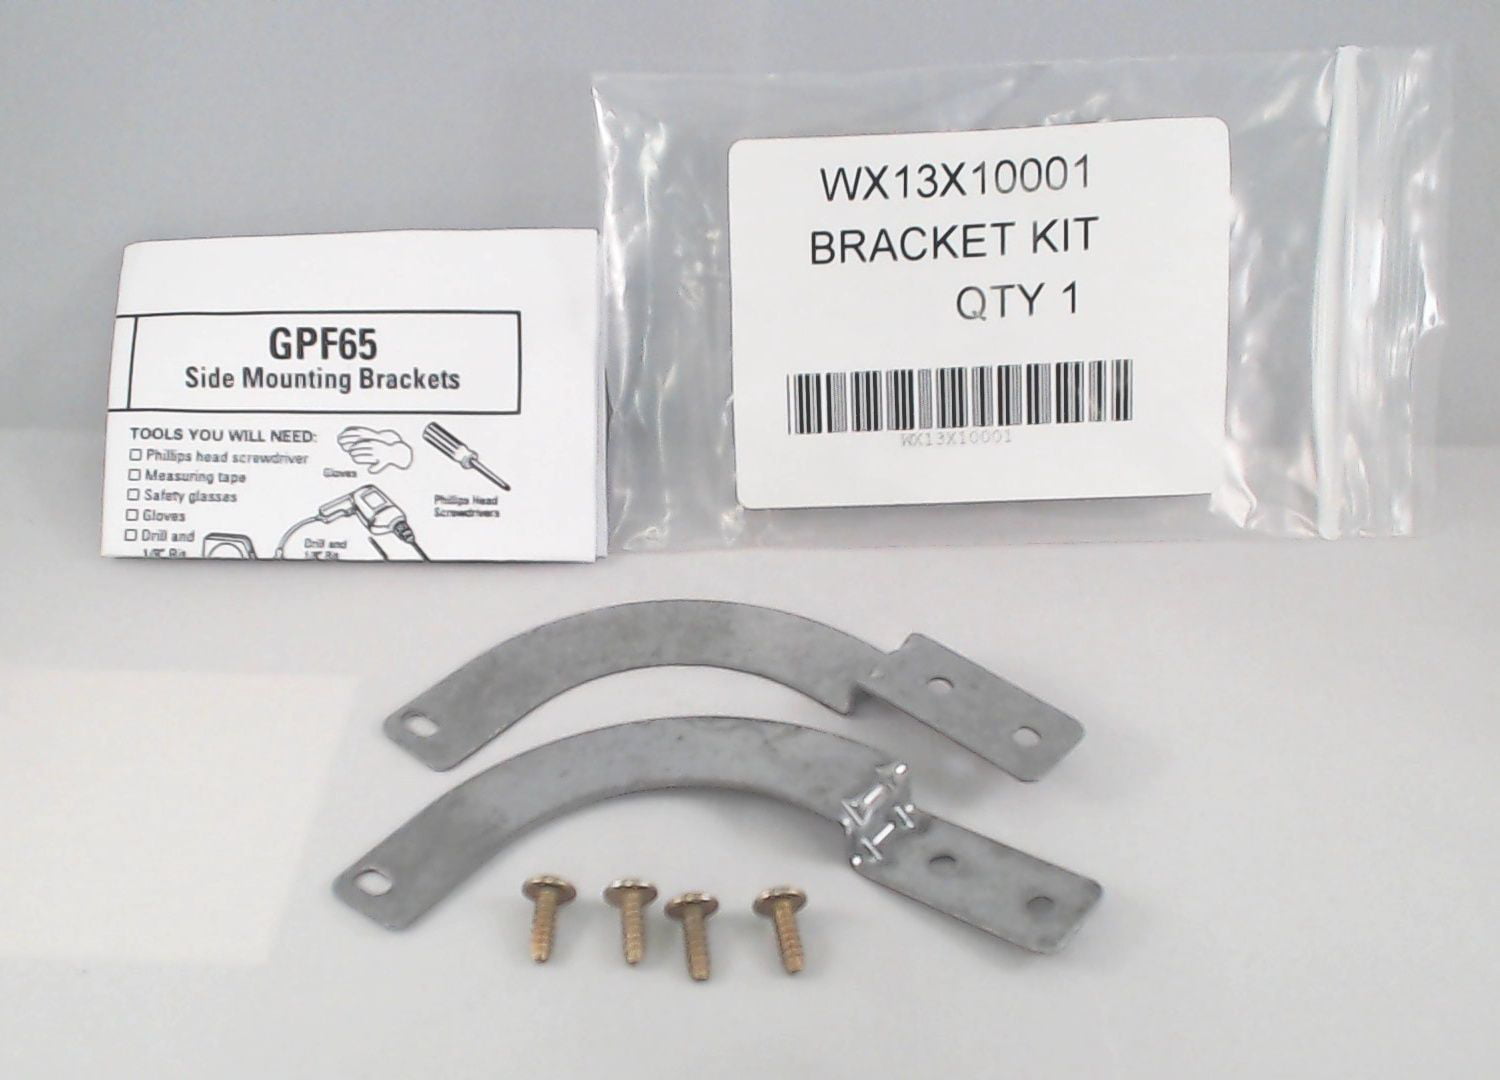 WX13X10001 by GE Appliances - Dishwasher Bracket Kit for Non-Wood